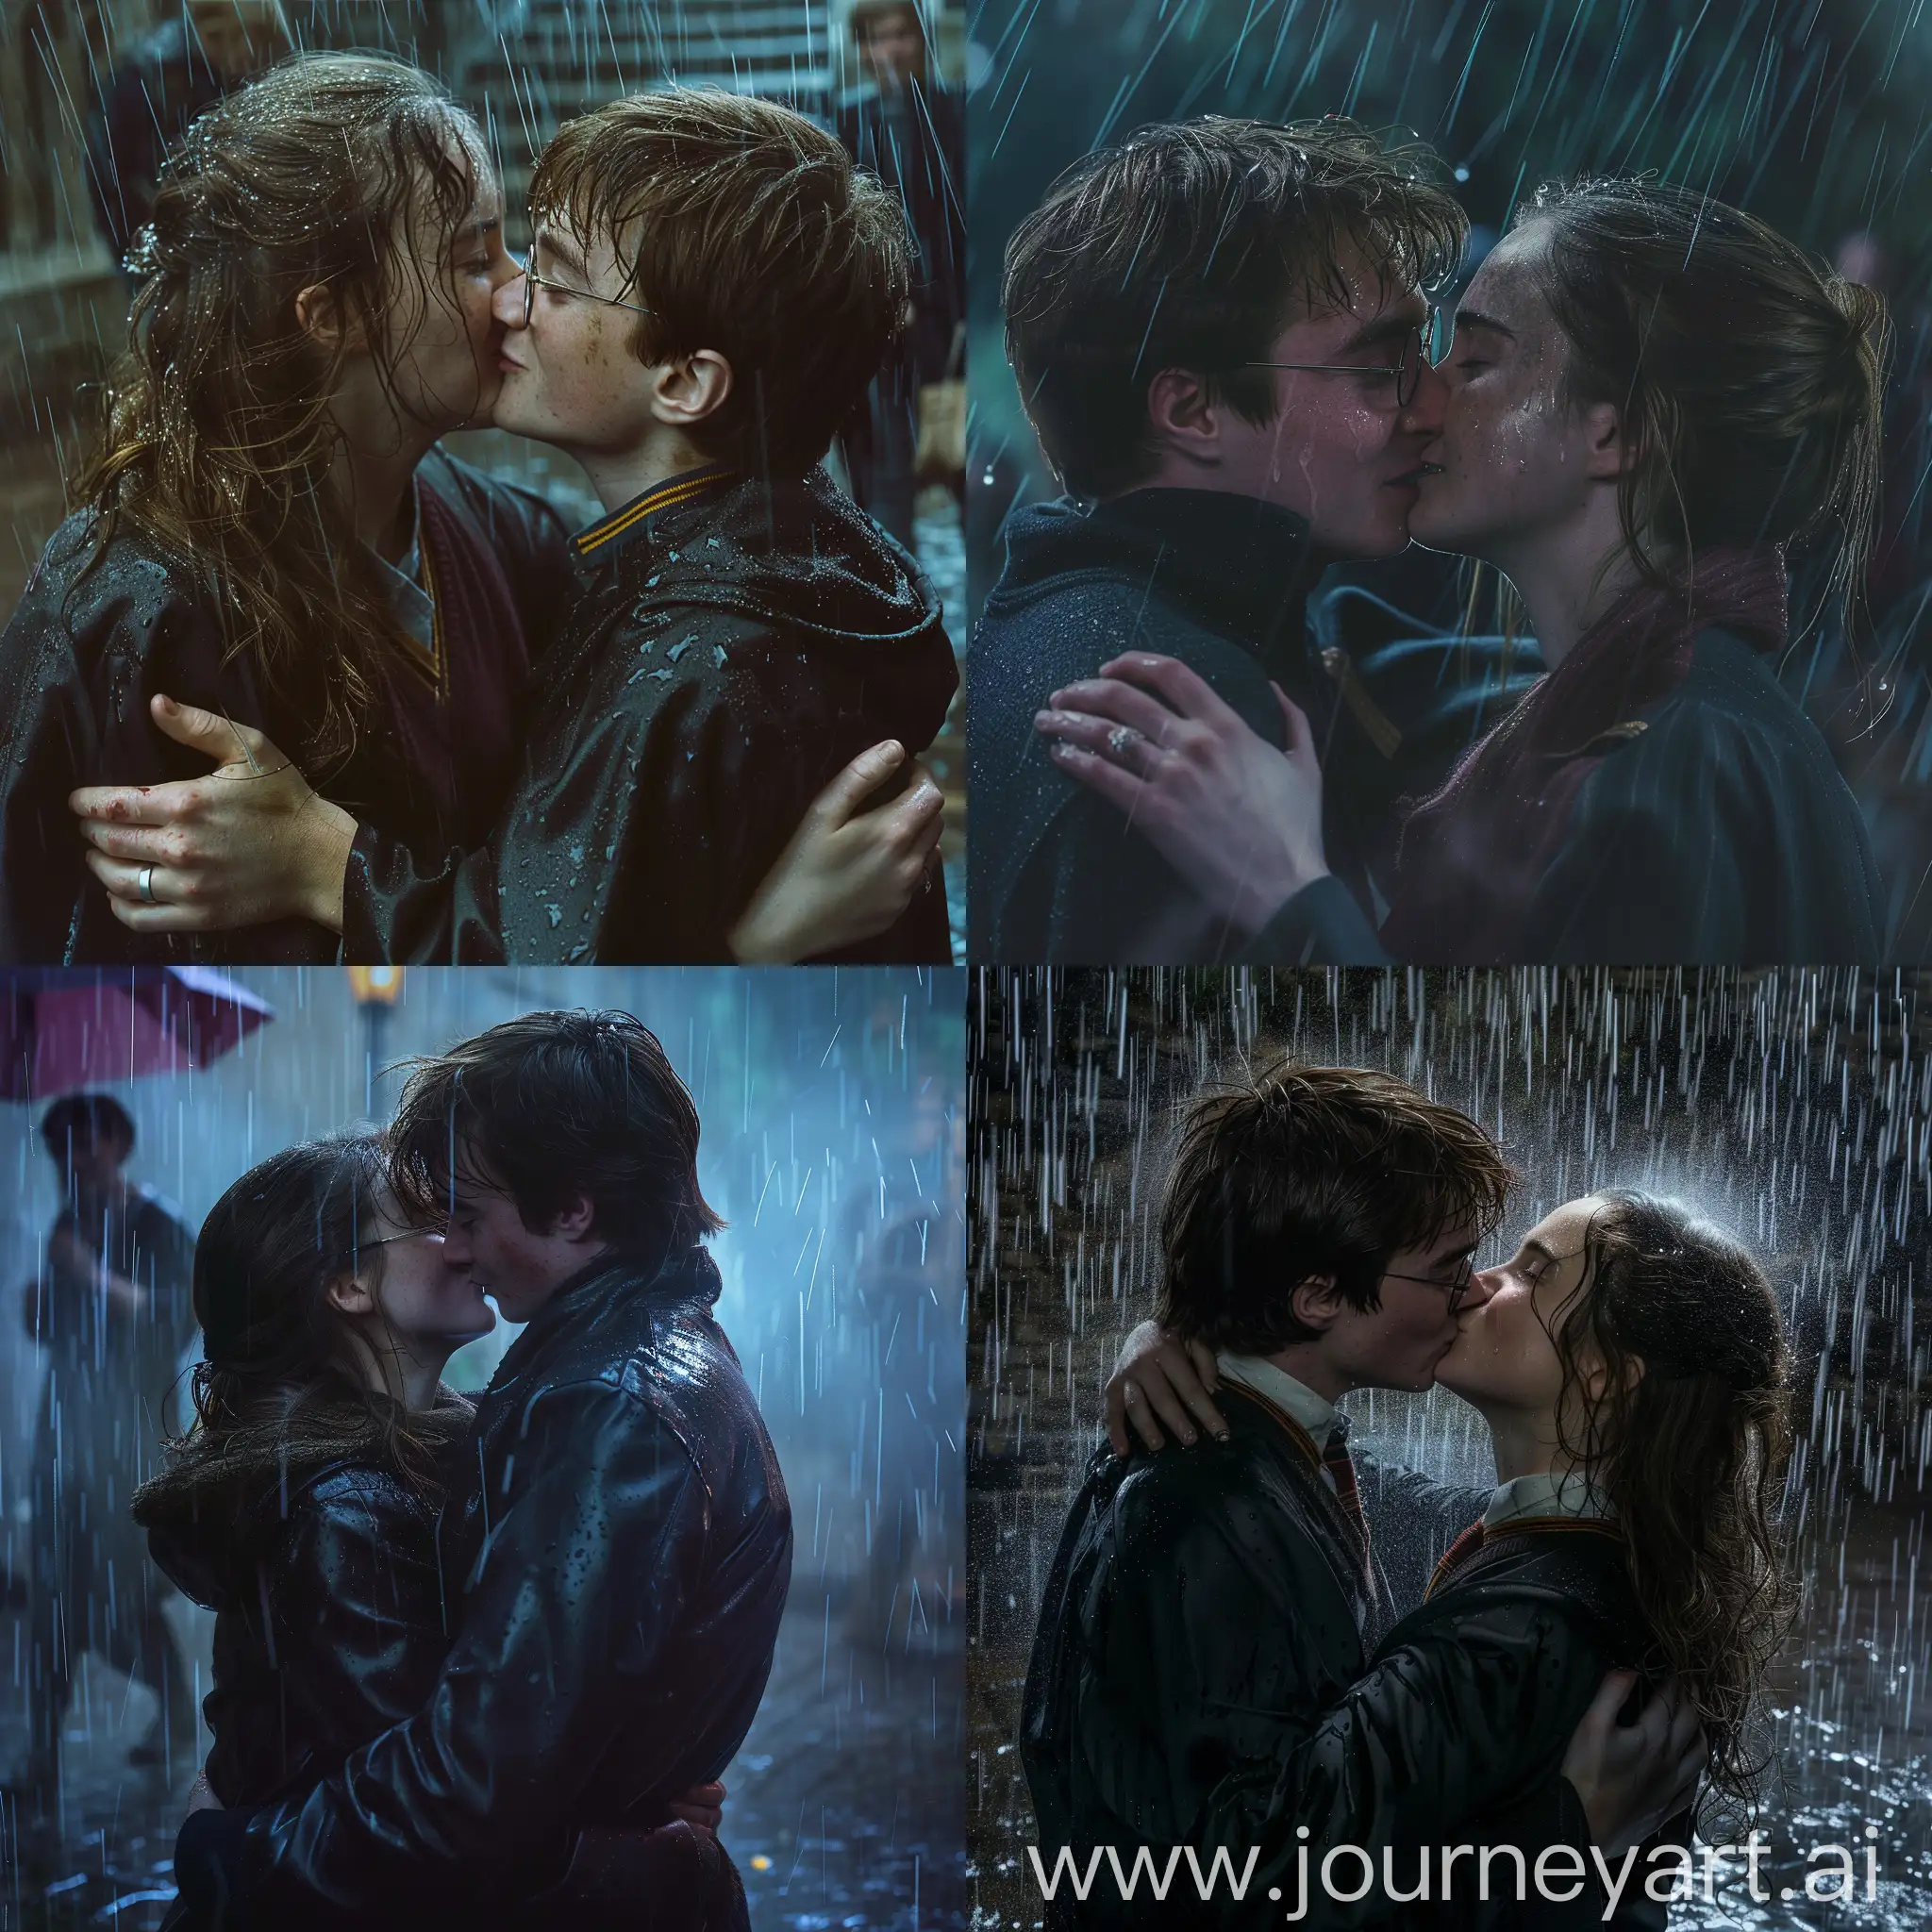 Harry Potter kisses Hermione in the rain, they hug, extremely realistic, 8k